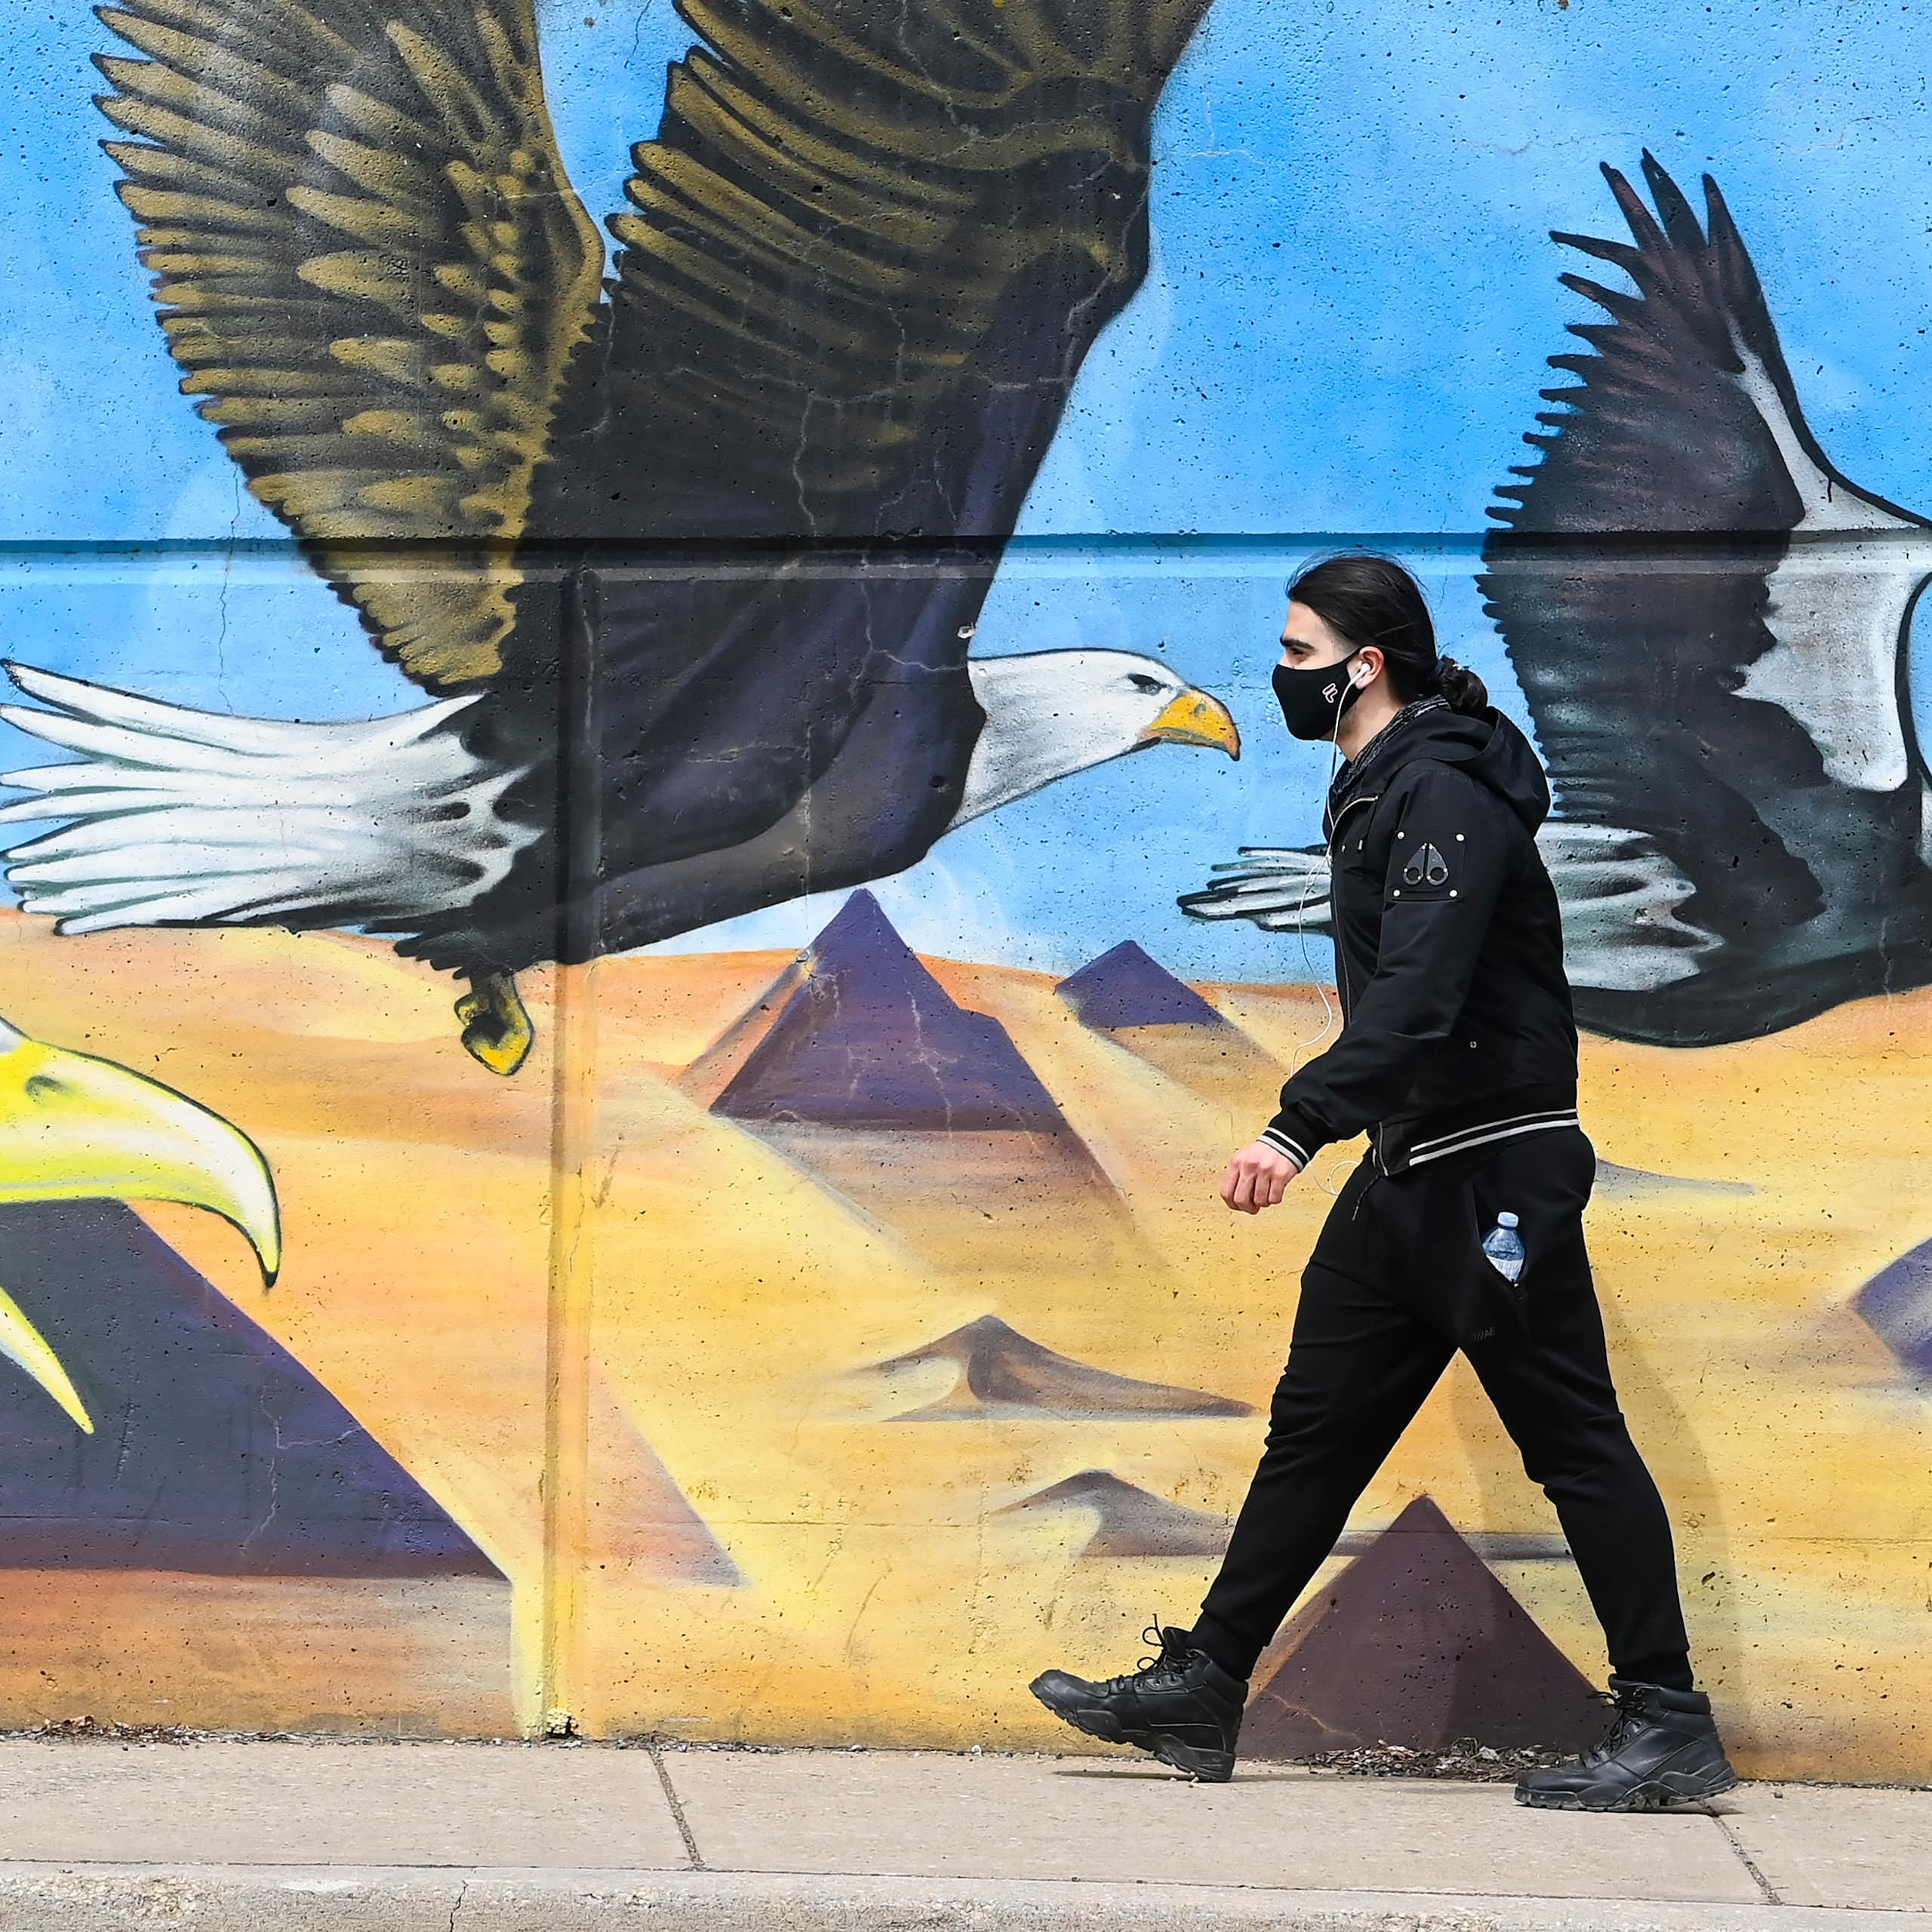 A person wearing a face mask strides past a mural showing giant eagles flying towards them